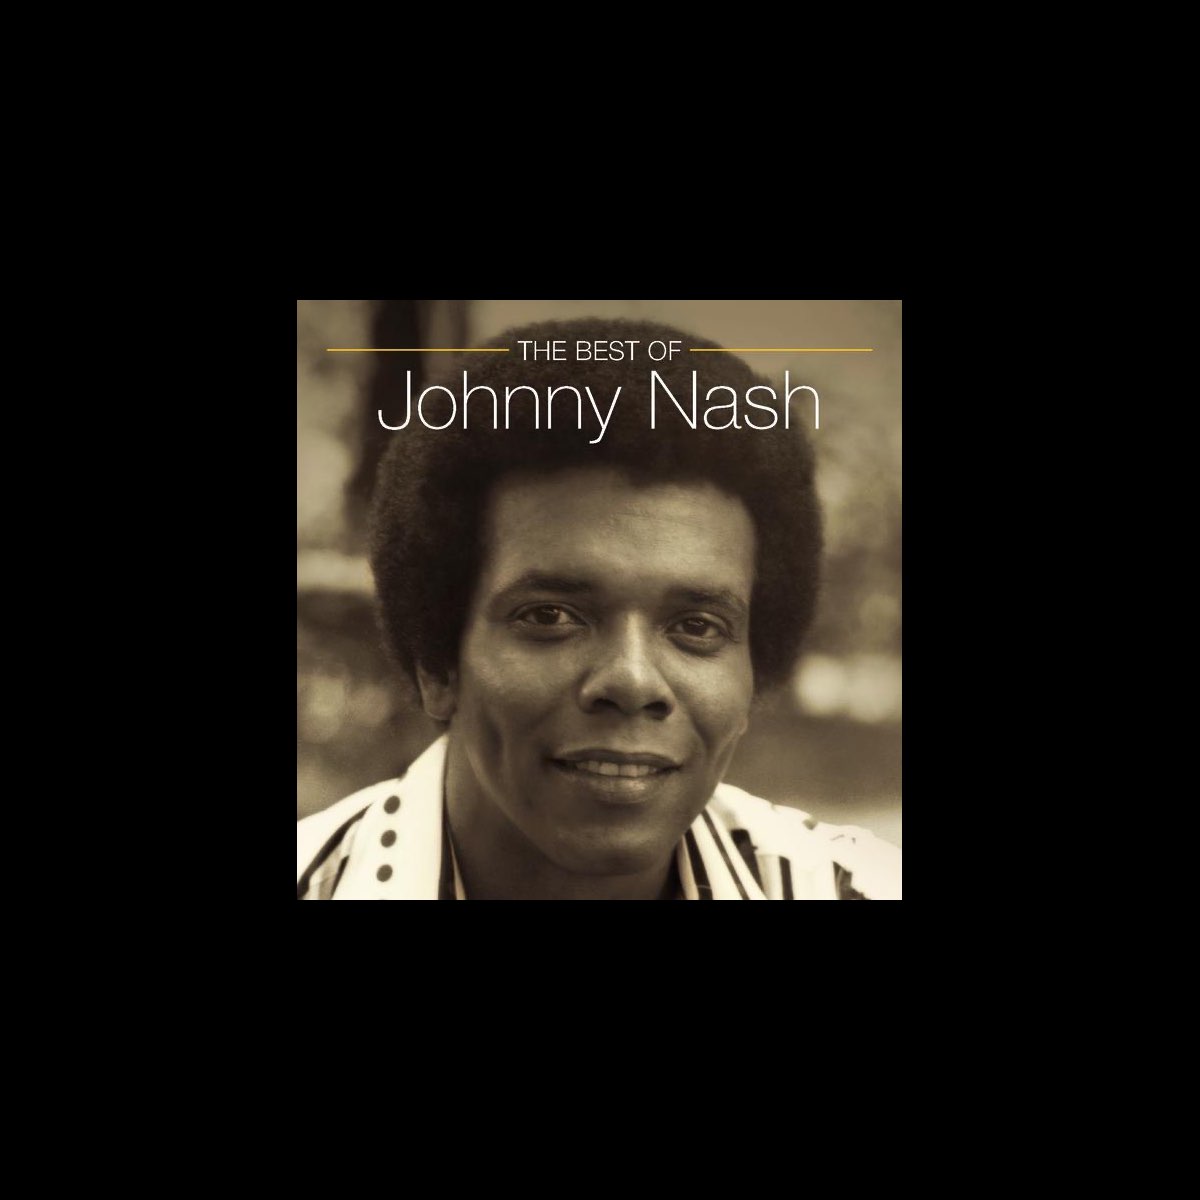 ‎The Best of Johnny Nash - Album by Johnny Nash - Apple Music